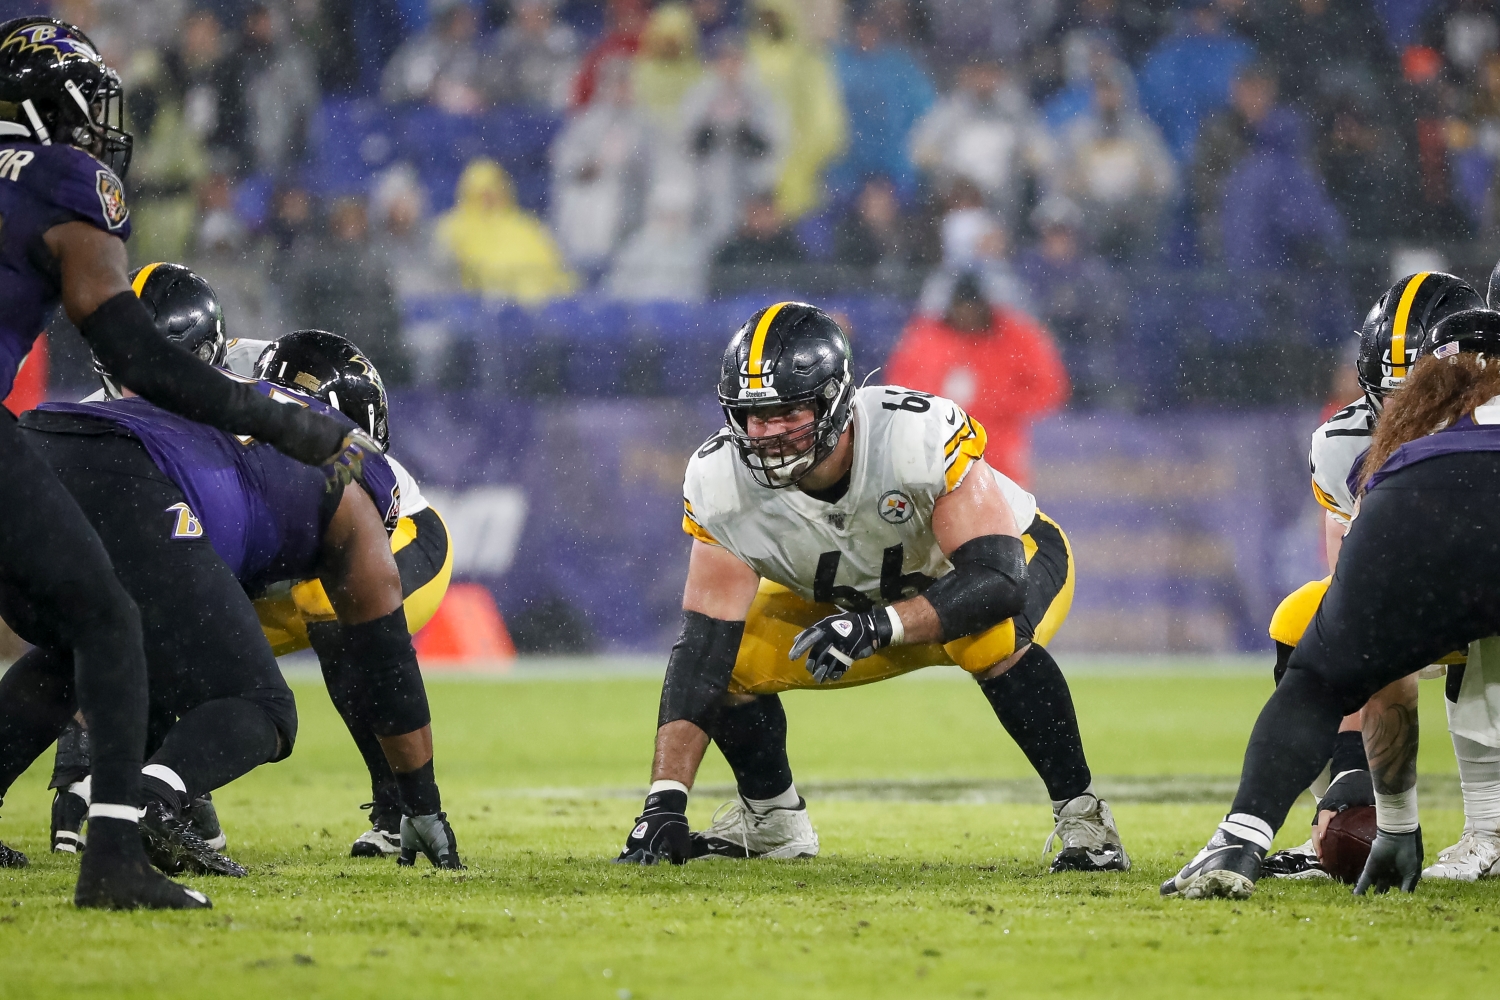 Pittsburgh Steelers guard David DeCastro in his stance before a play against the Baltimore Ravens.